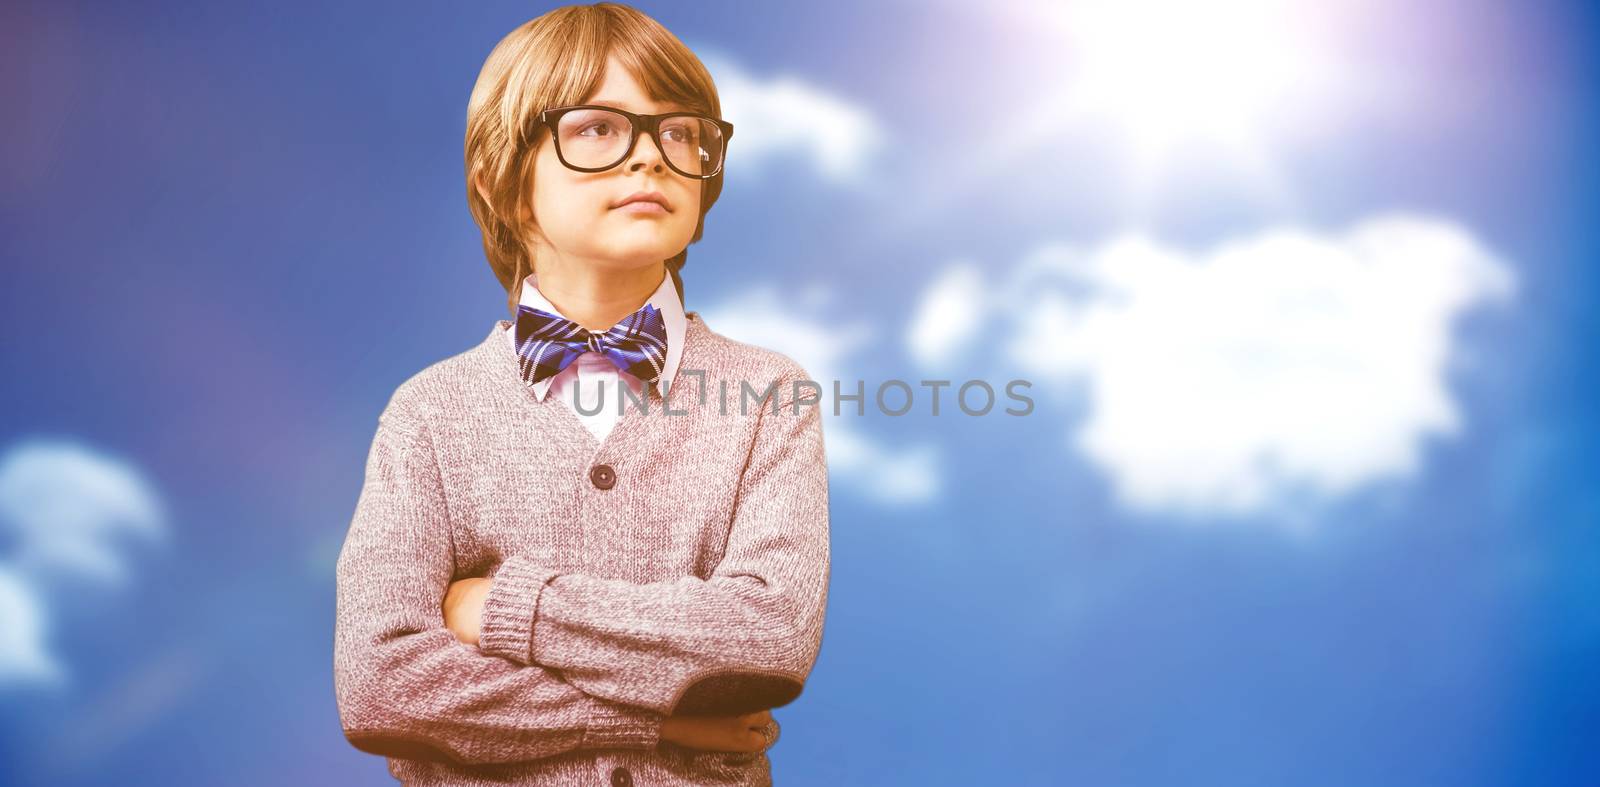 Composite image of cute pupil dressed up as teacher by Wavebreakmedia